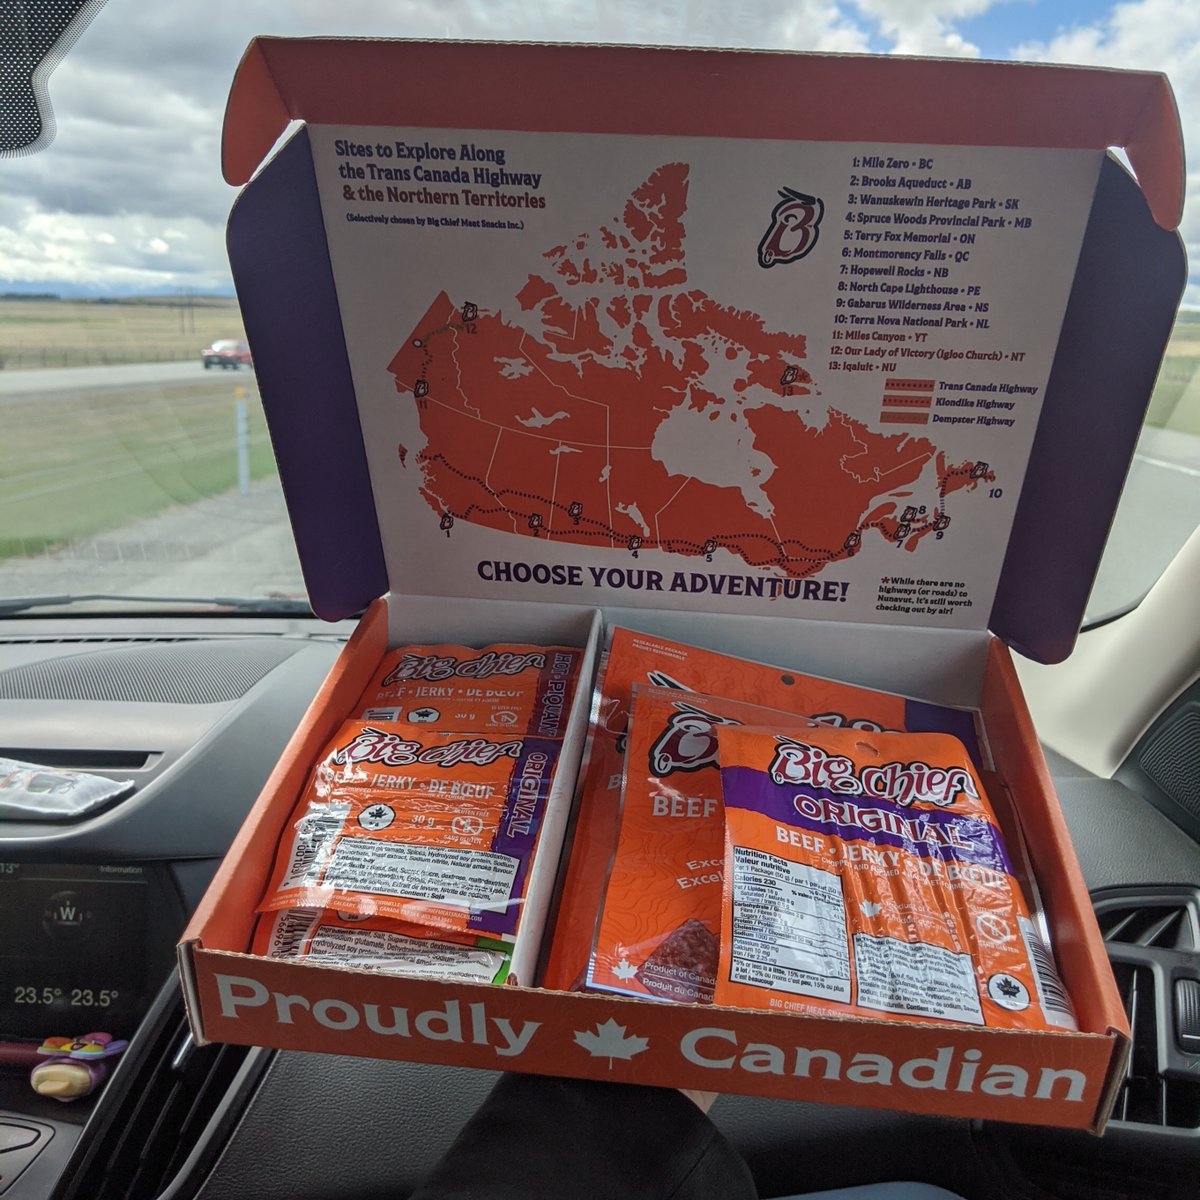 [GIVEAWAY] Today is #NationalRoadTripDay 🚗 and we're giving you a chance to win a Road Trip Box of Jerky! RT to Win!

The winner must be located in Canada 🇨🇦Contest closes June 1st. #BigTasteAdventure